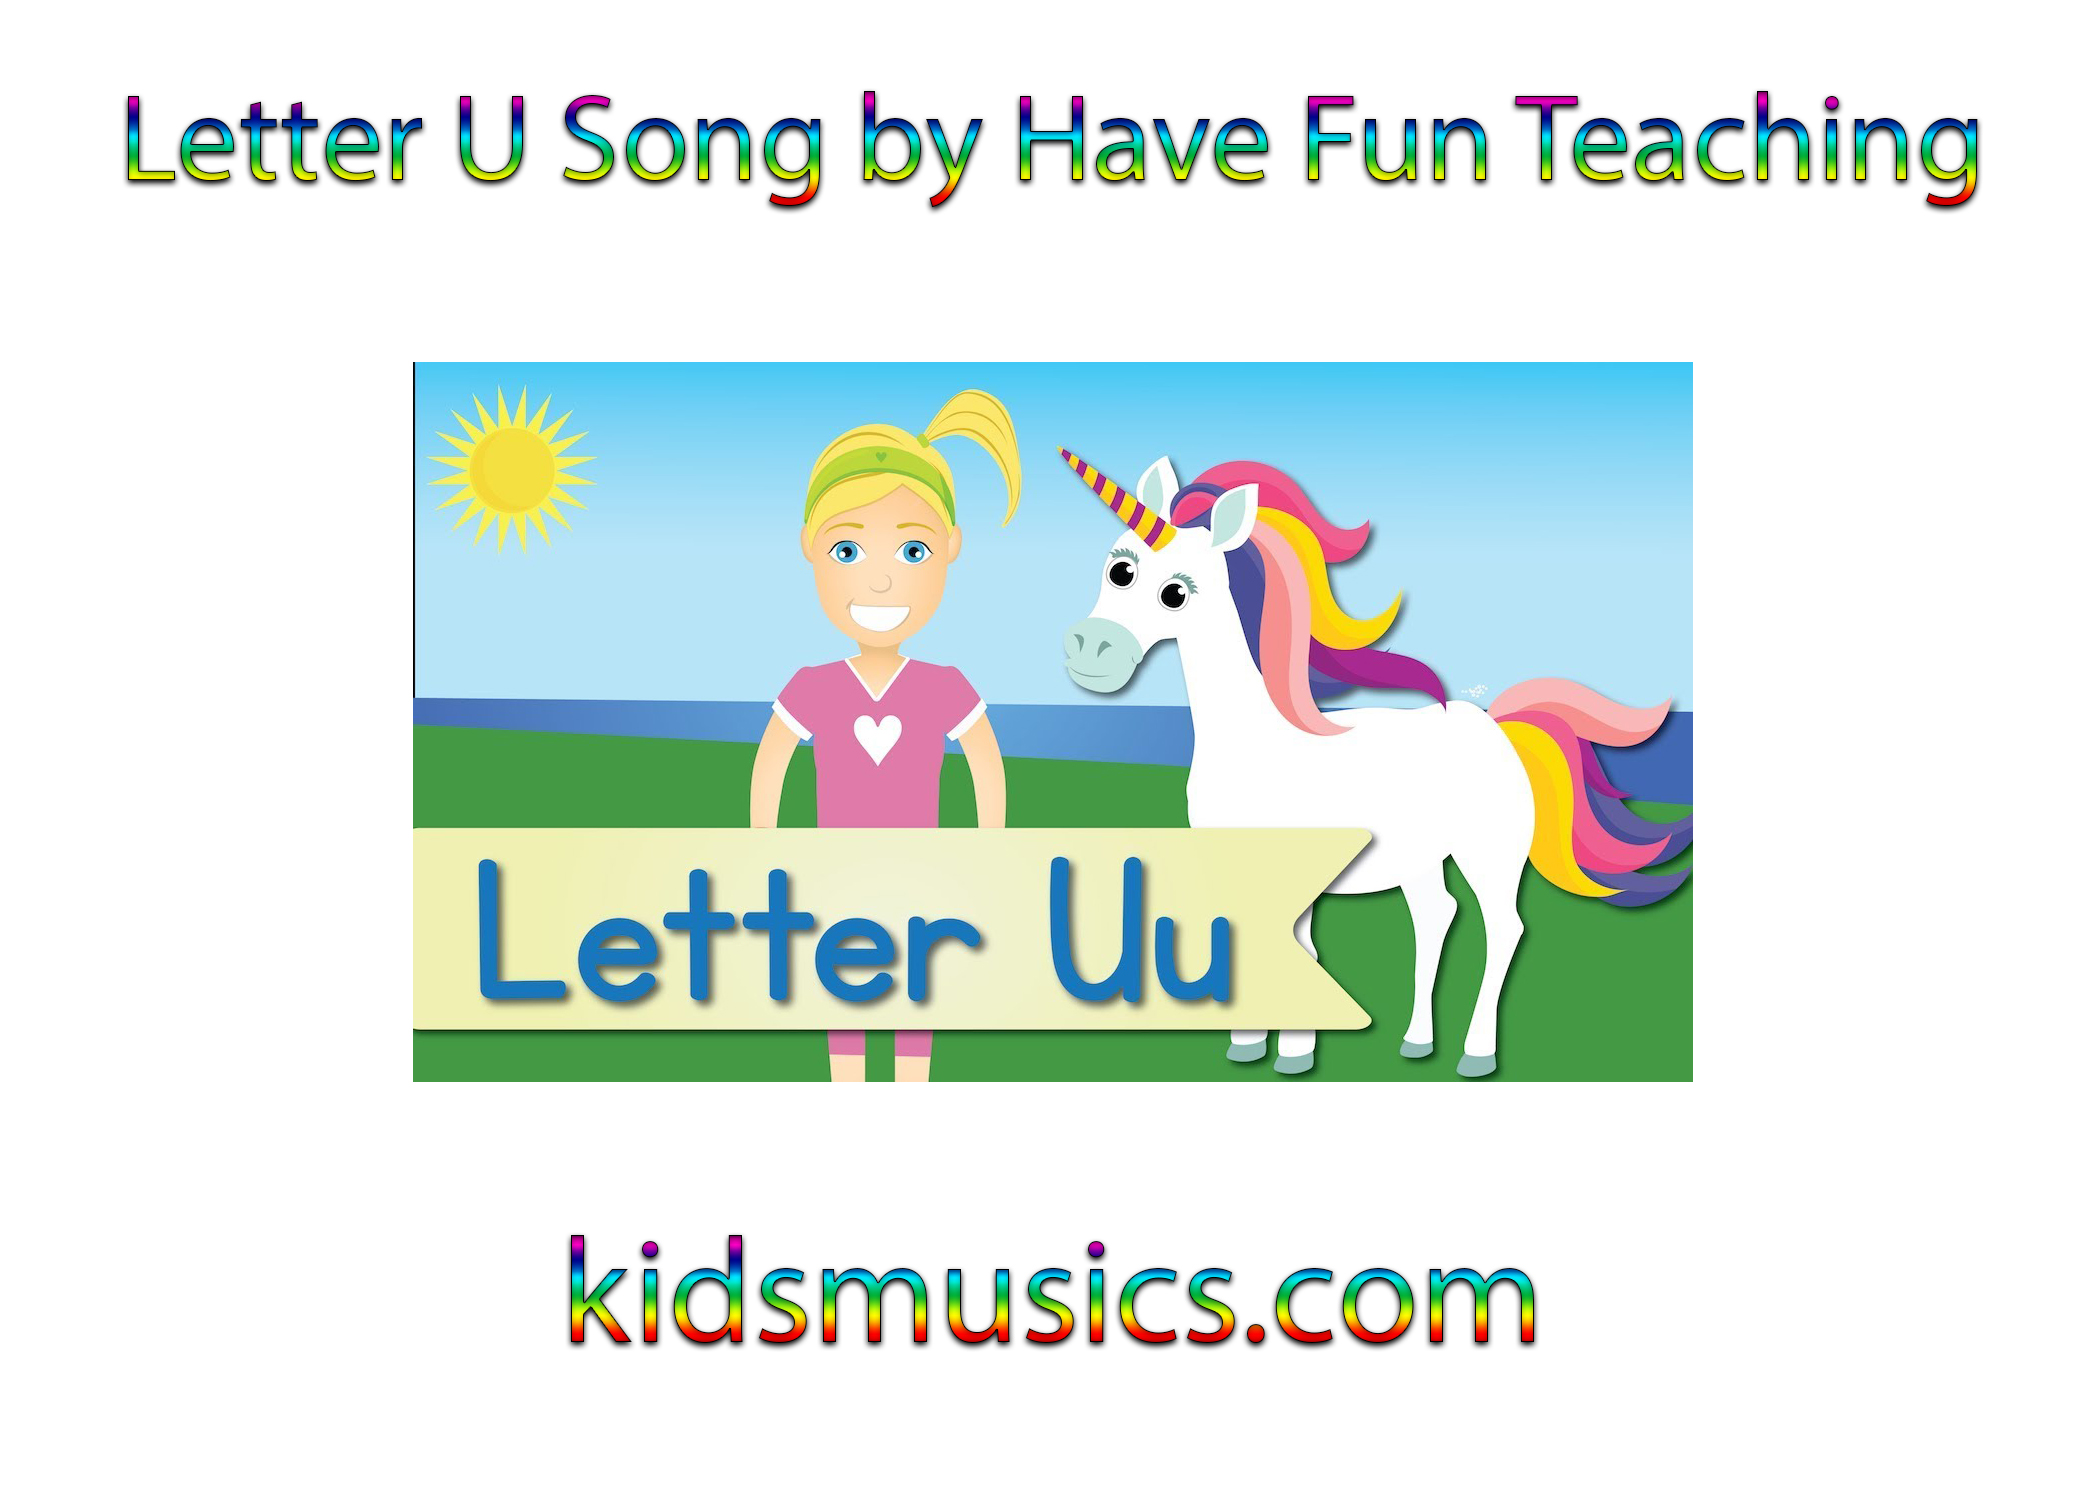 Letter U Song by Have Fun Teaching